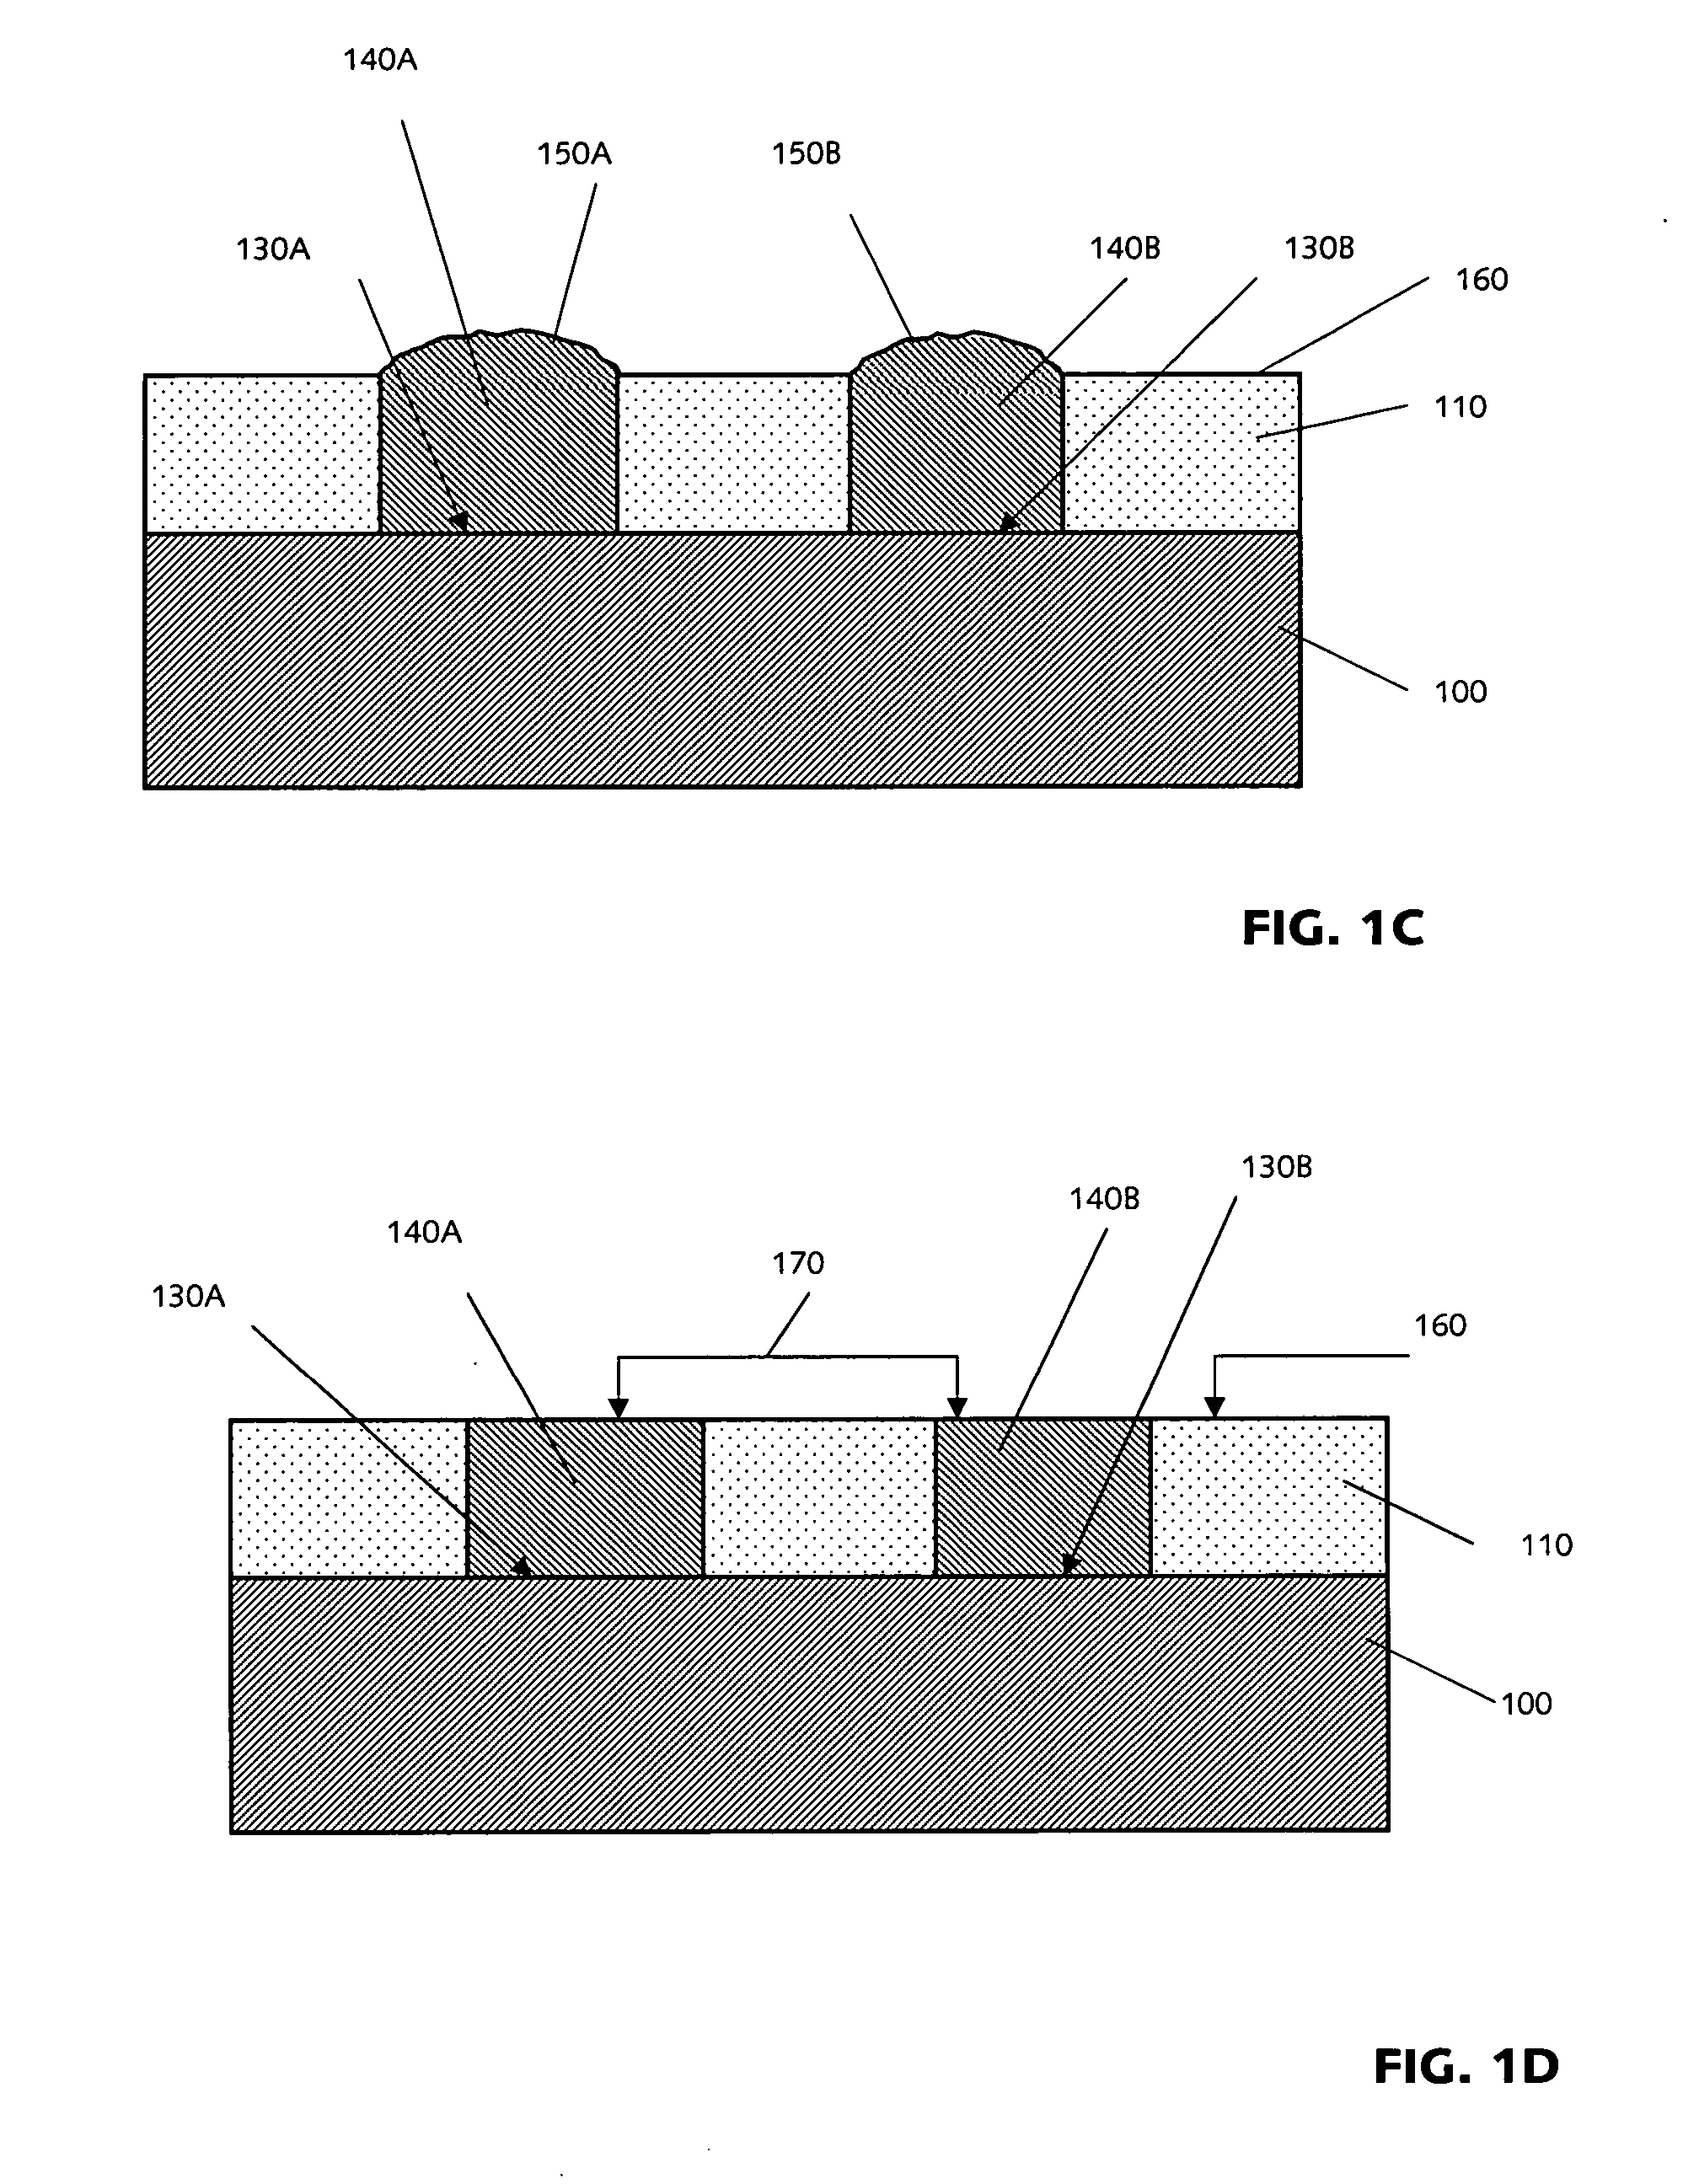 Lattice-mismatched semiconductor structures on insulators